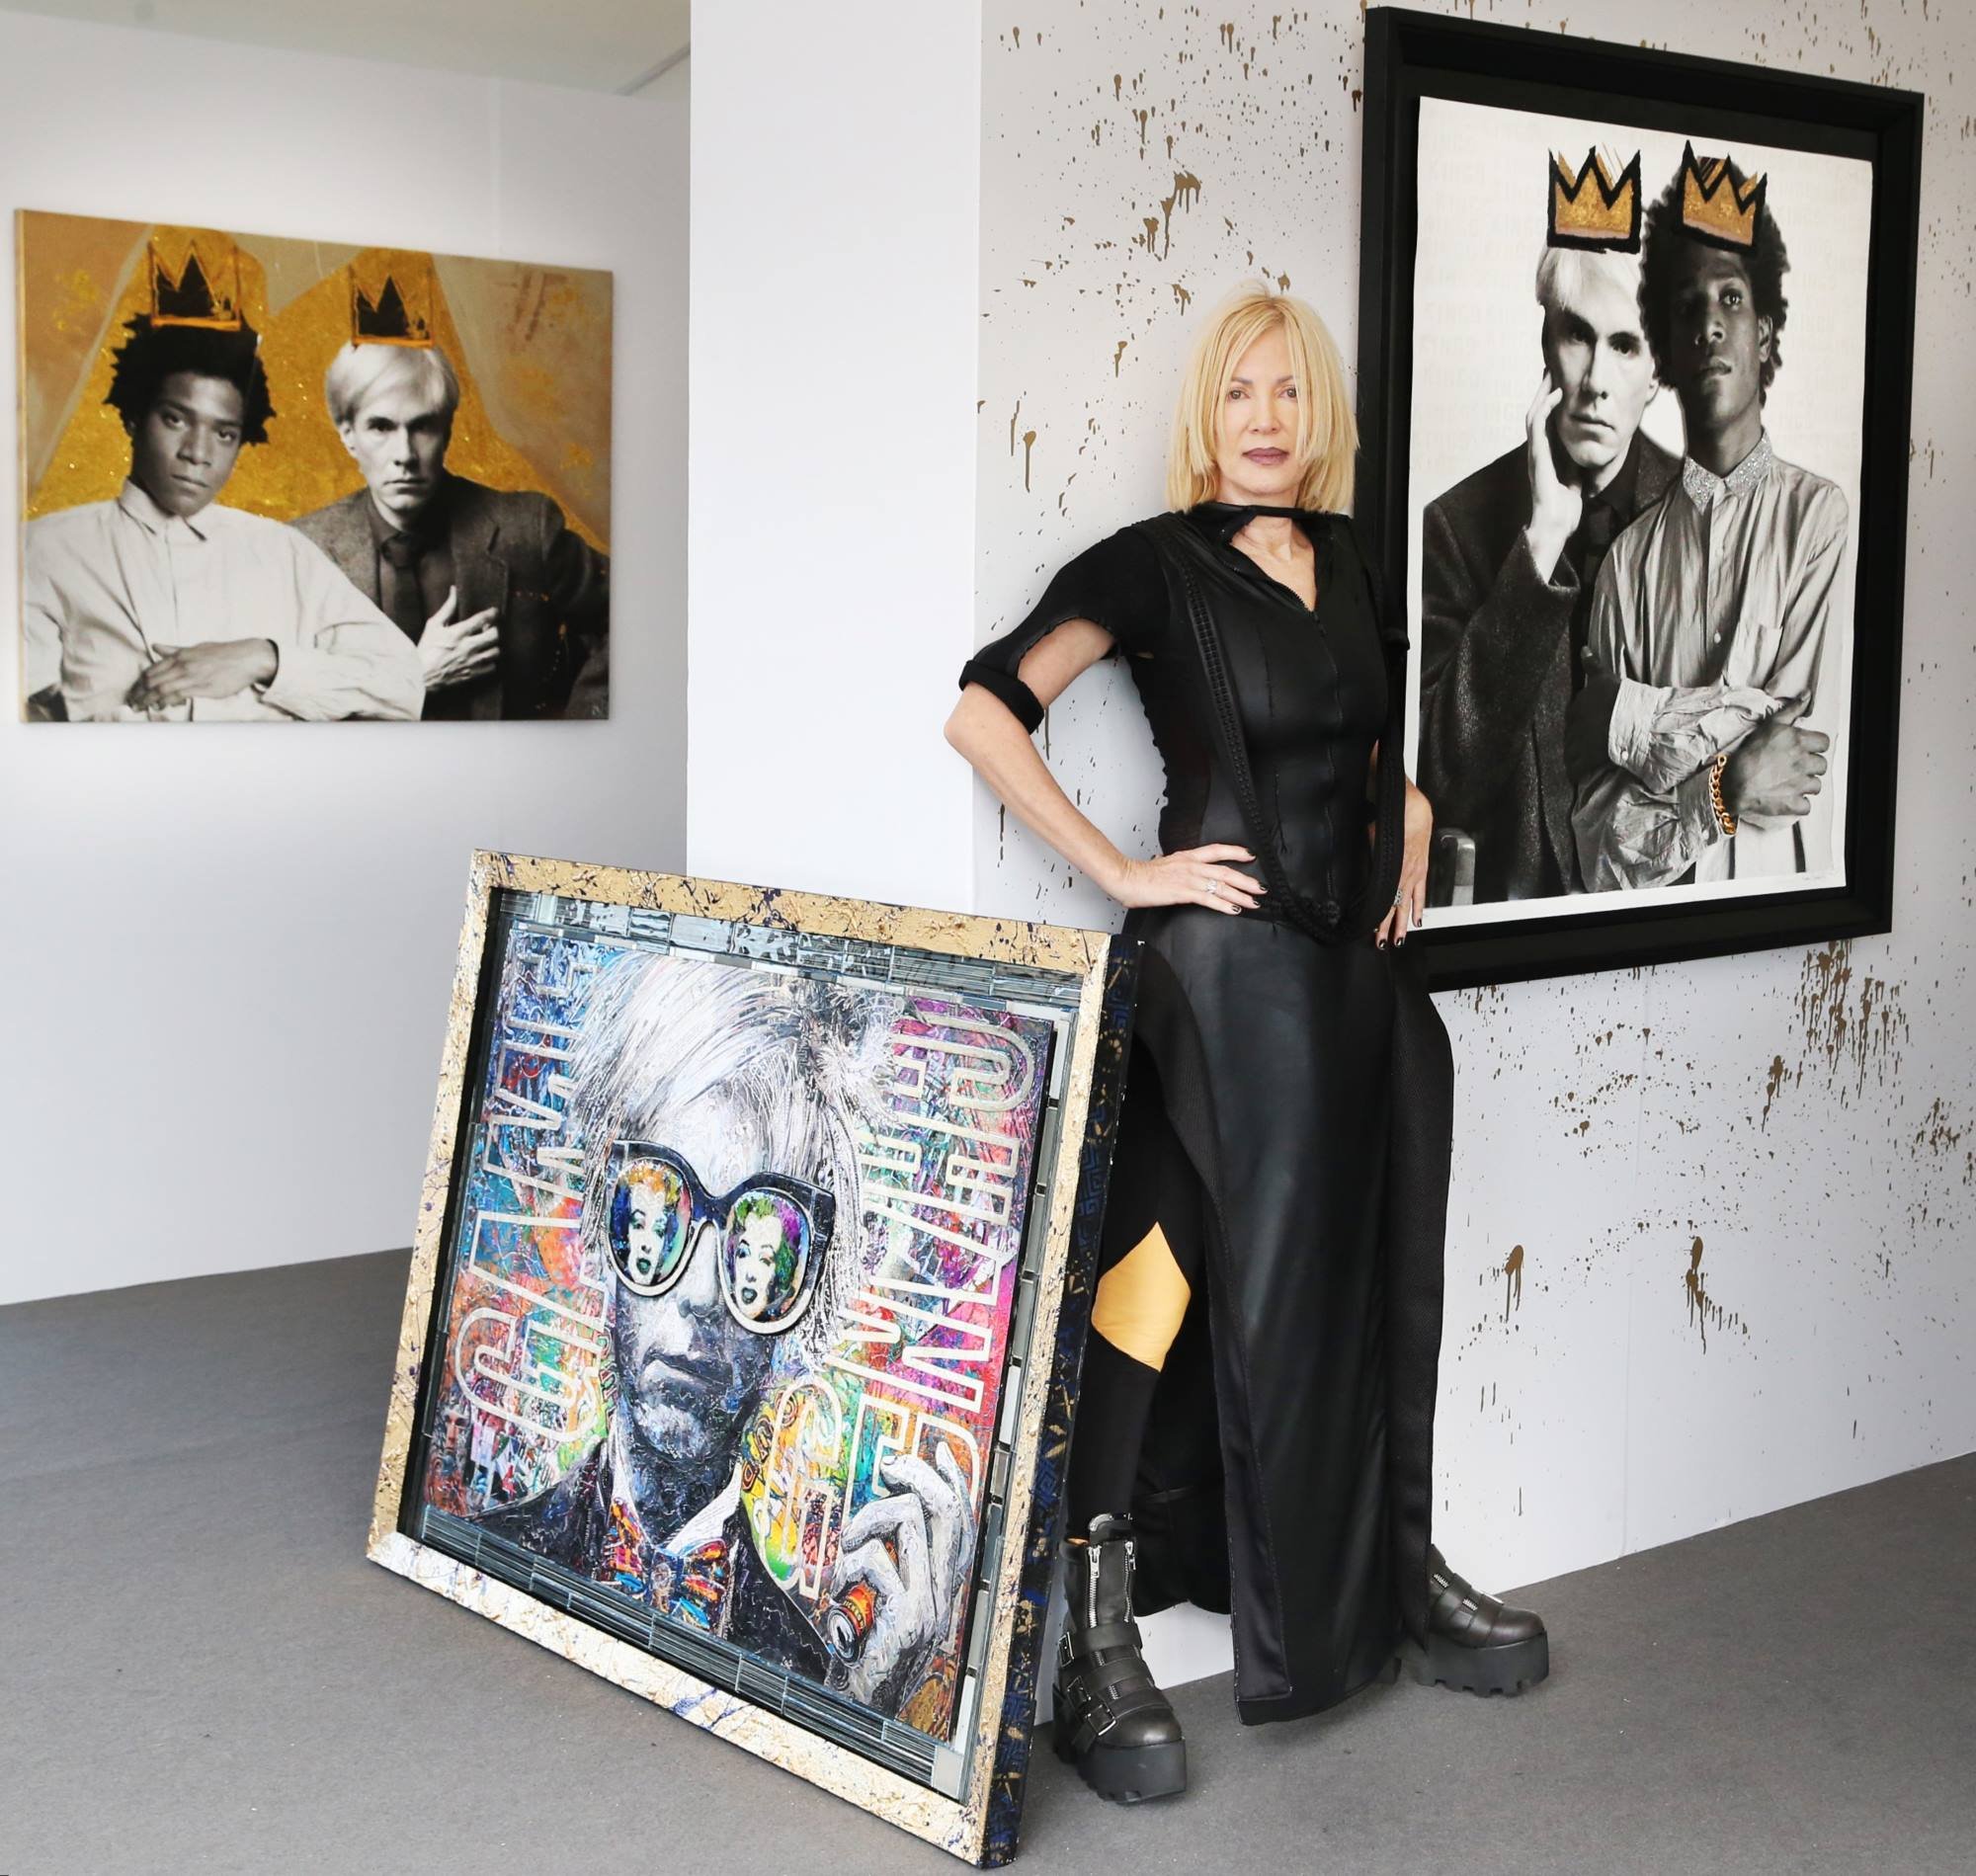 Karen-Bystedt-The-Lost-Warhols-Art-Exhibition-Andy-Warhol-London-Ad-Lib-Gallery.jpg